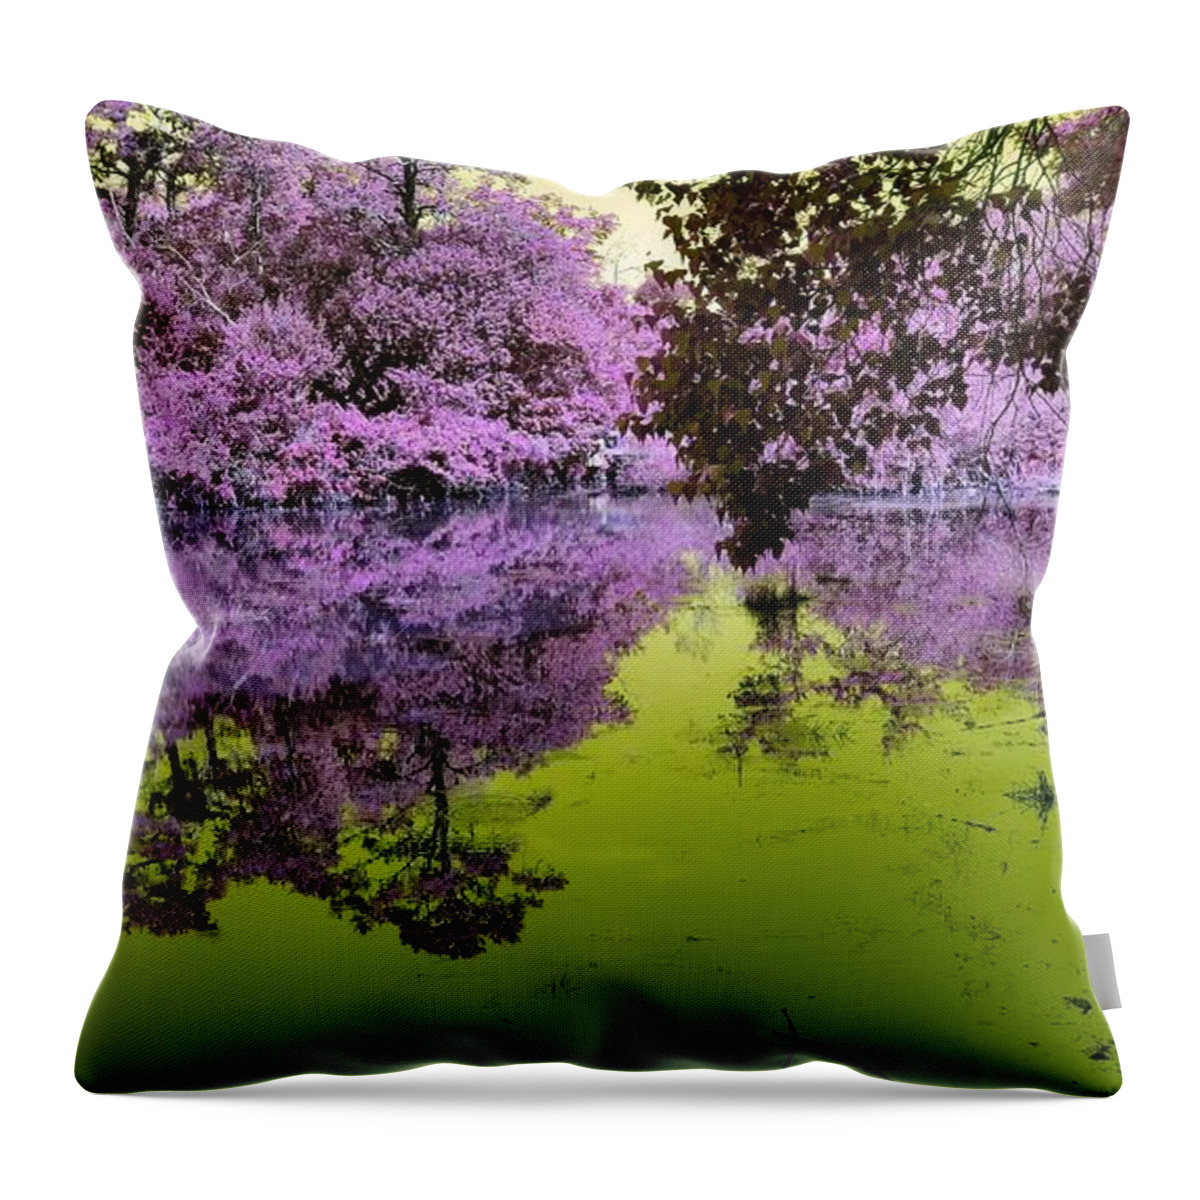 Fantasy Throw Pillow featuring the mixed media The Fantasy Pond by Stacie Siemsen